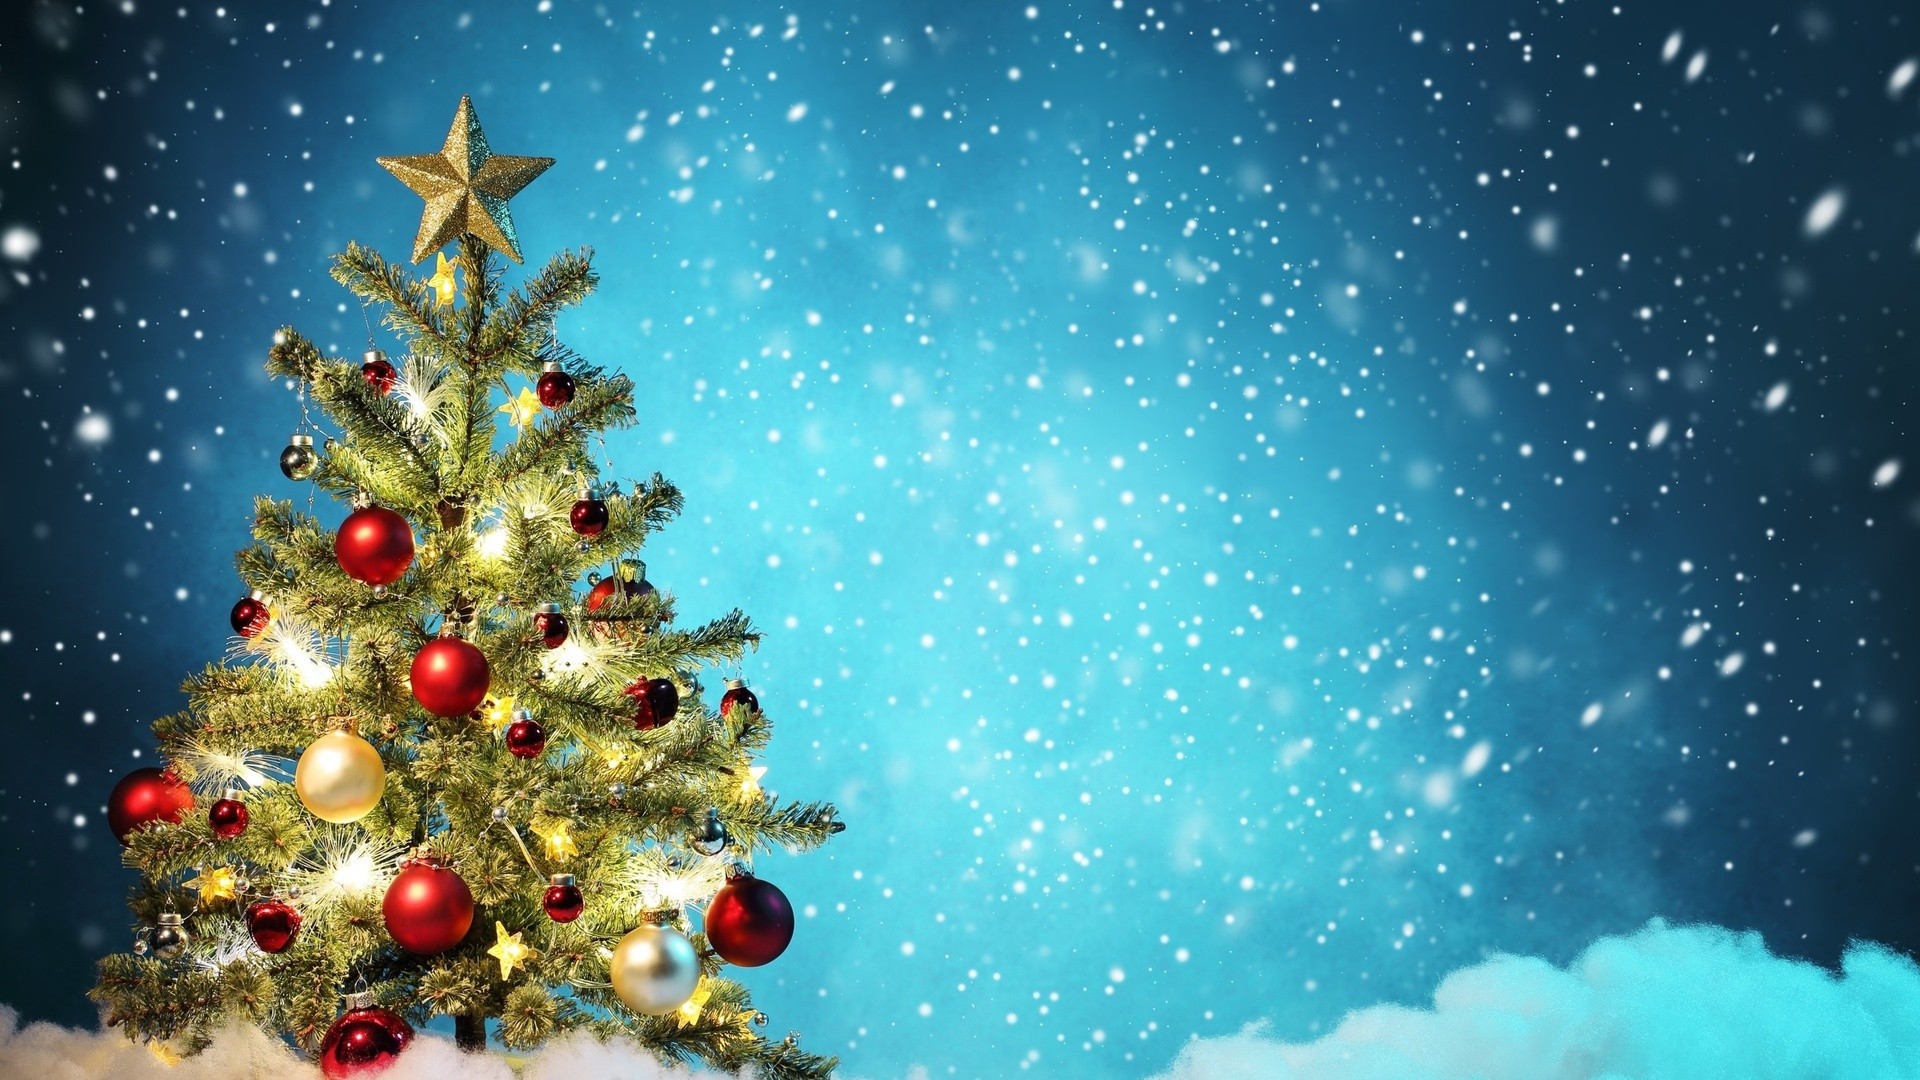 1920x1080 pictures christmas backgrounds desktop wallpapers high definition monitor  download free amazing background photos artwork 19201080 Wallpaper